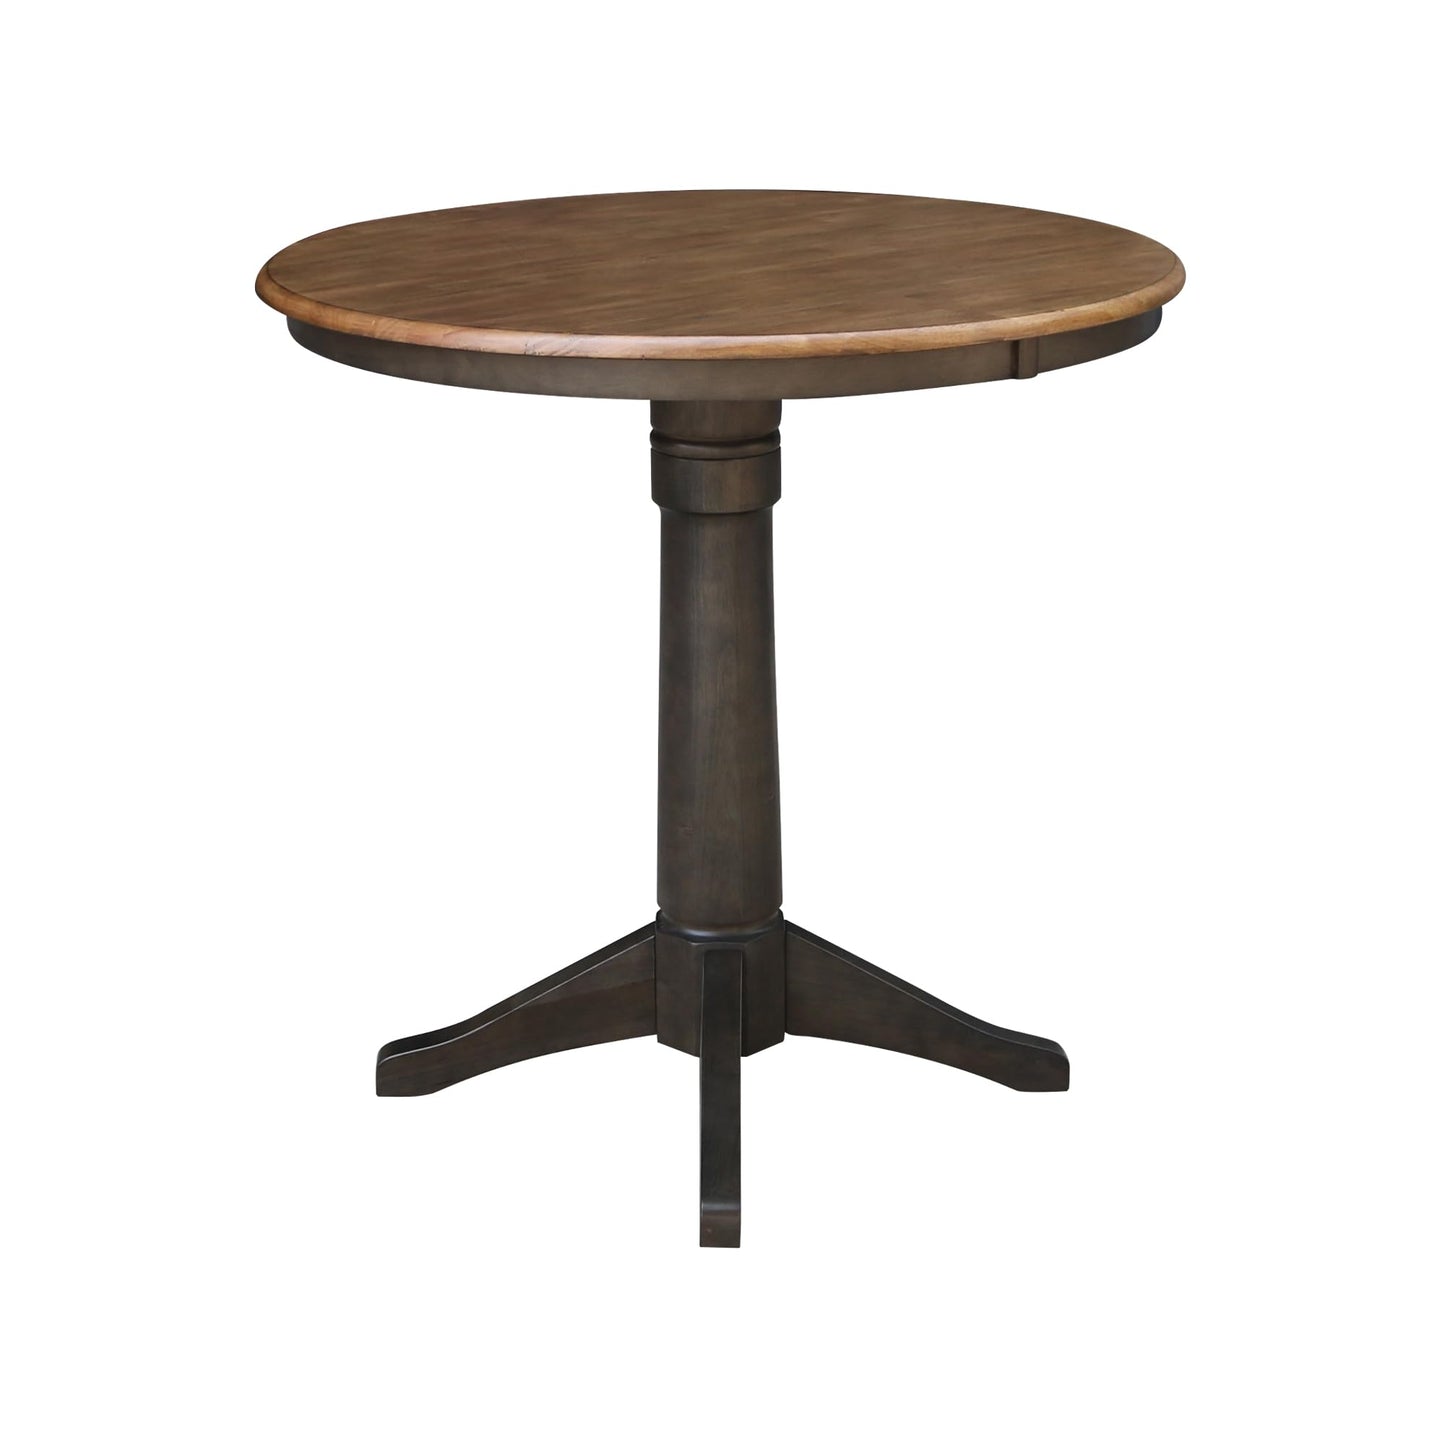 IC International Concepts Round Top Pedestal Dining Table, Counter Height, Hickory/Washed Coal